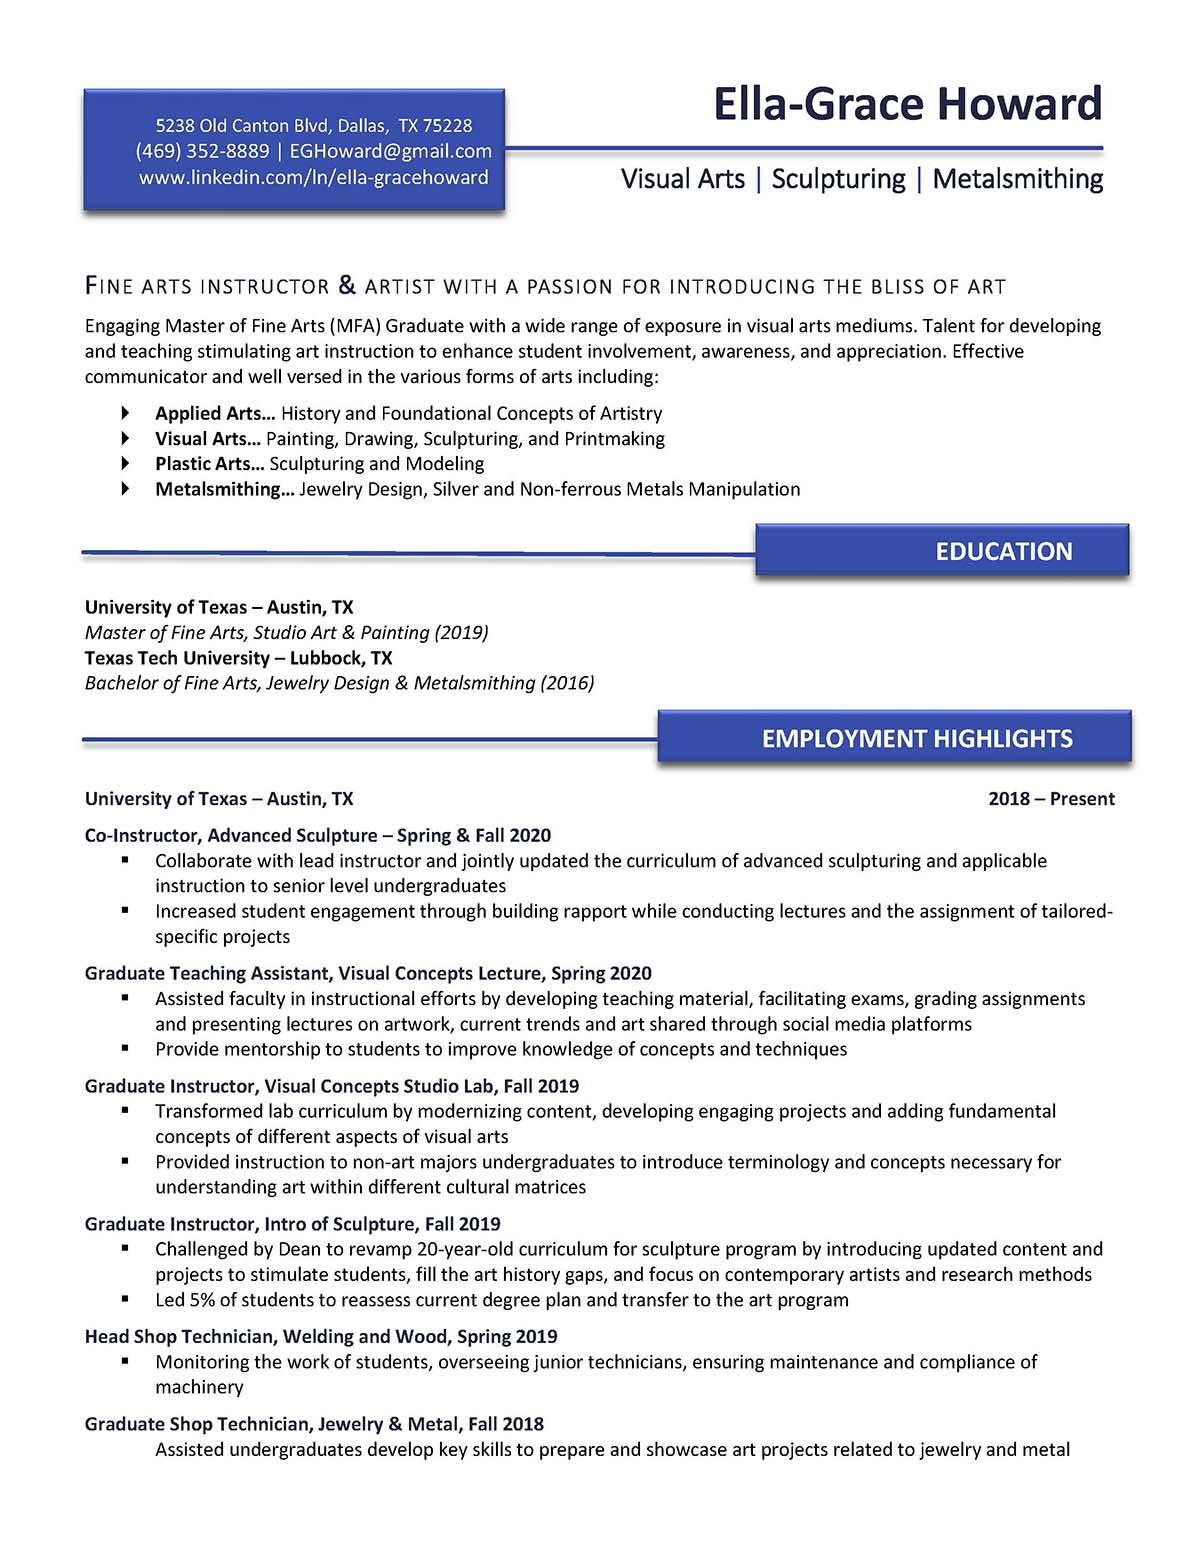 Sample resume: Visual Arts, Low Experience, Chronological